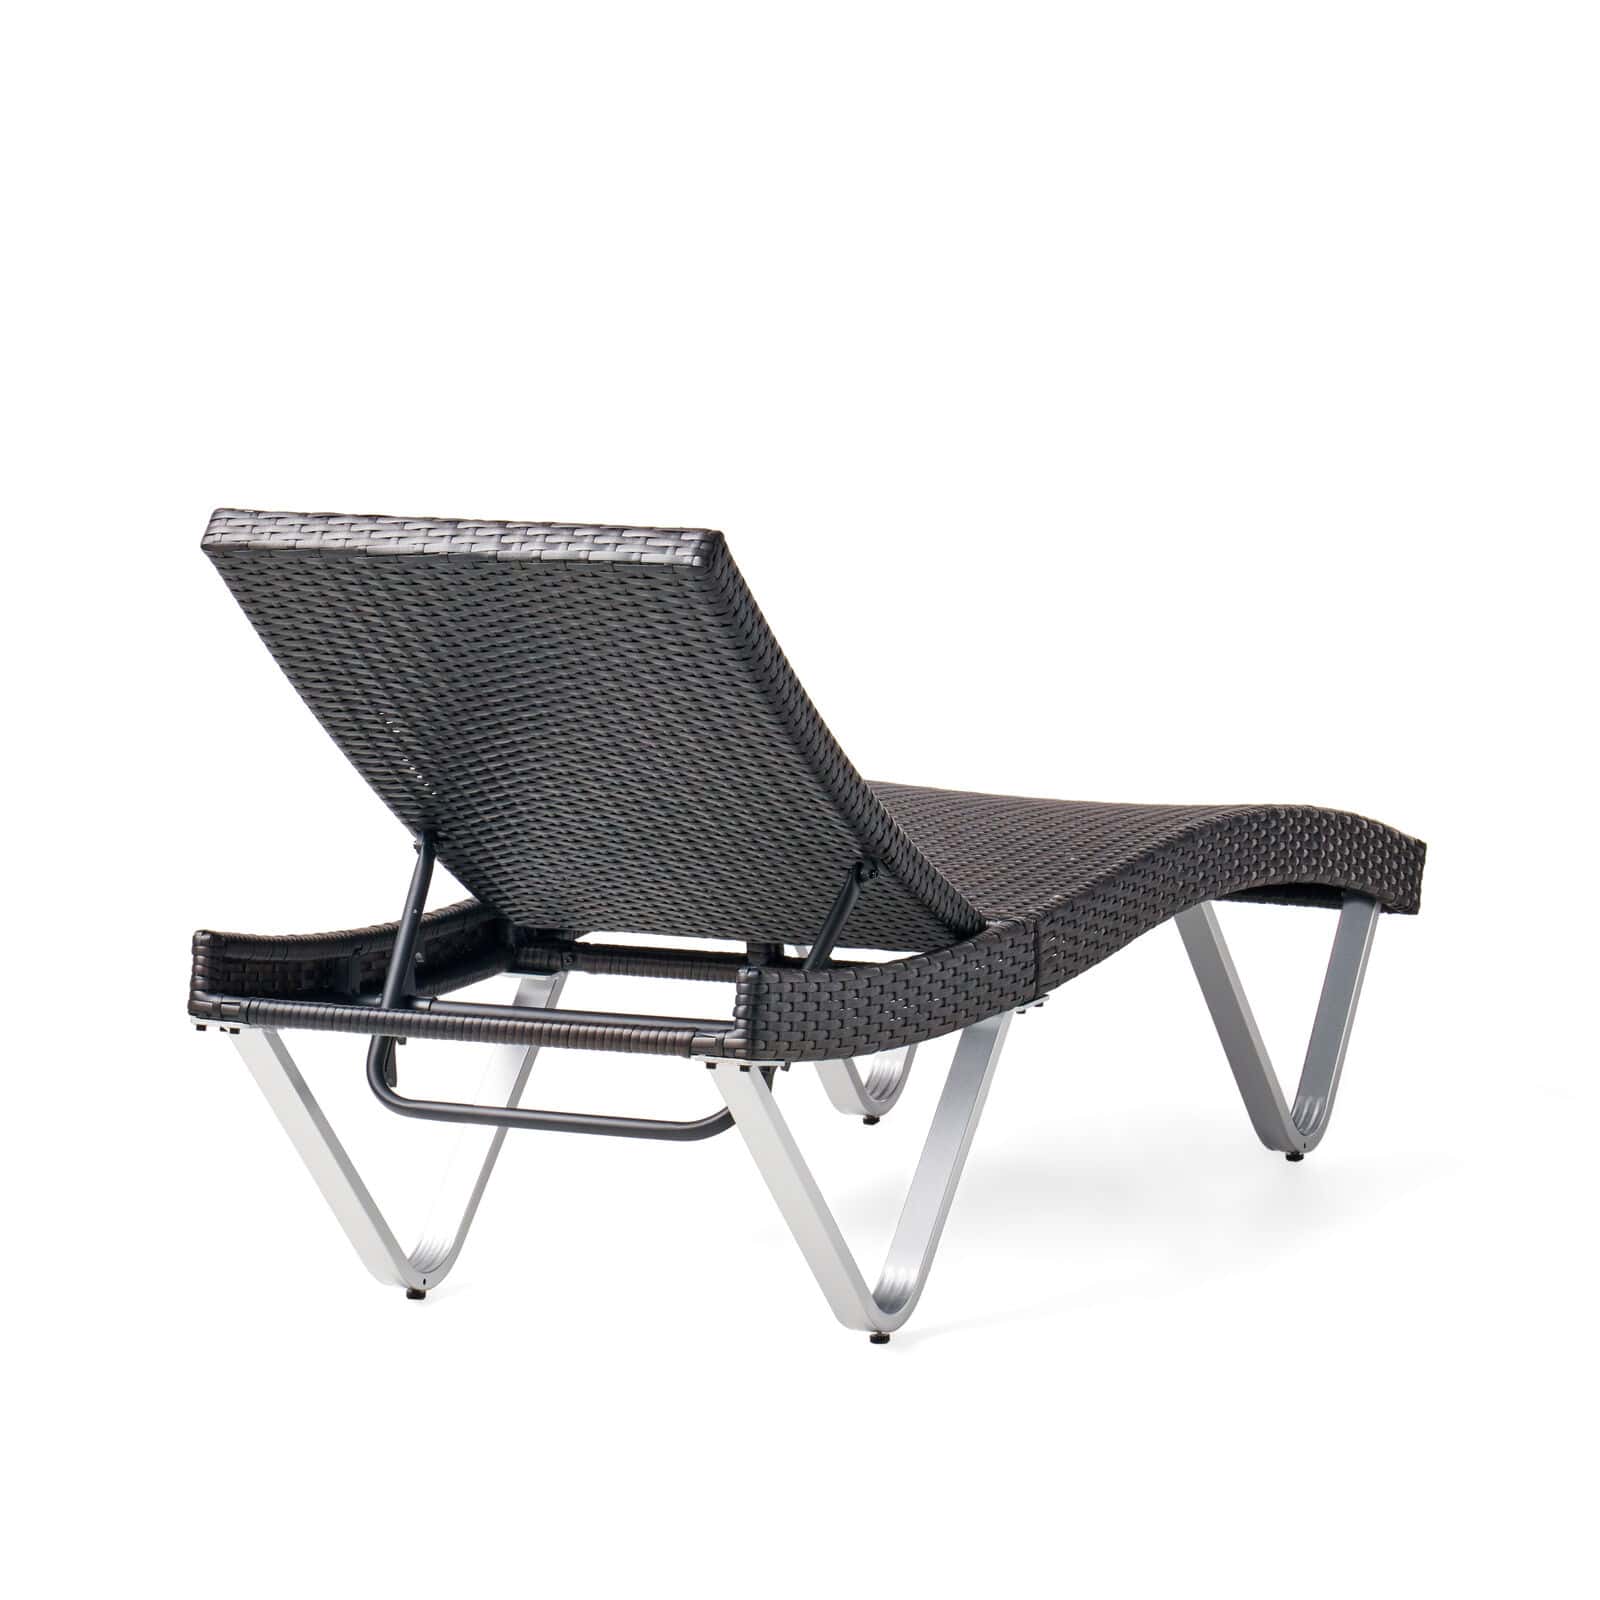 A black rattan chaise lounge on a white background.